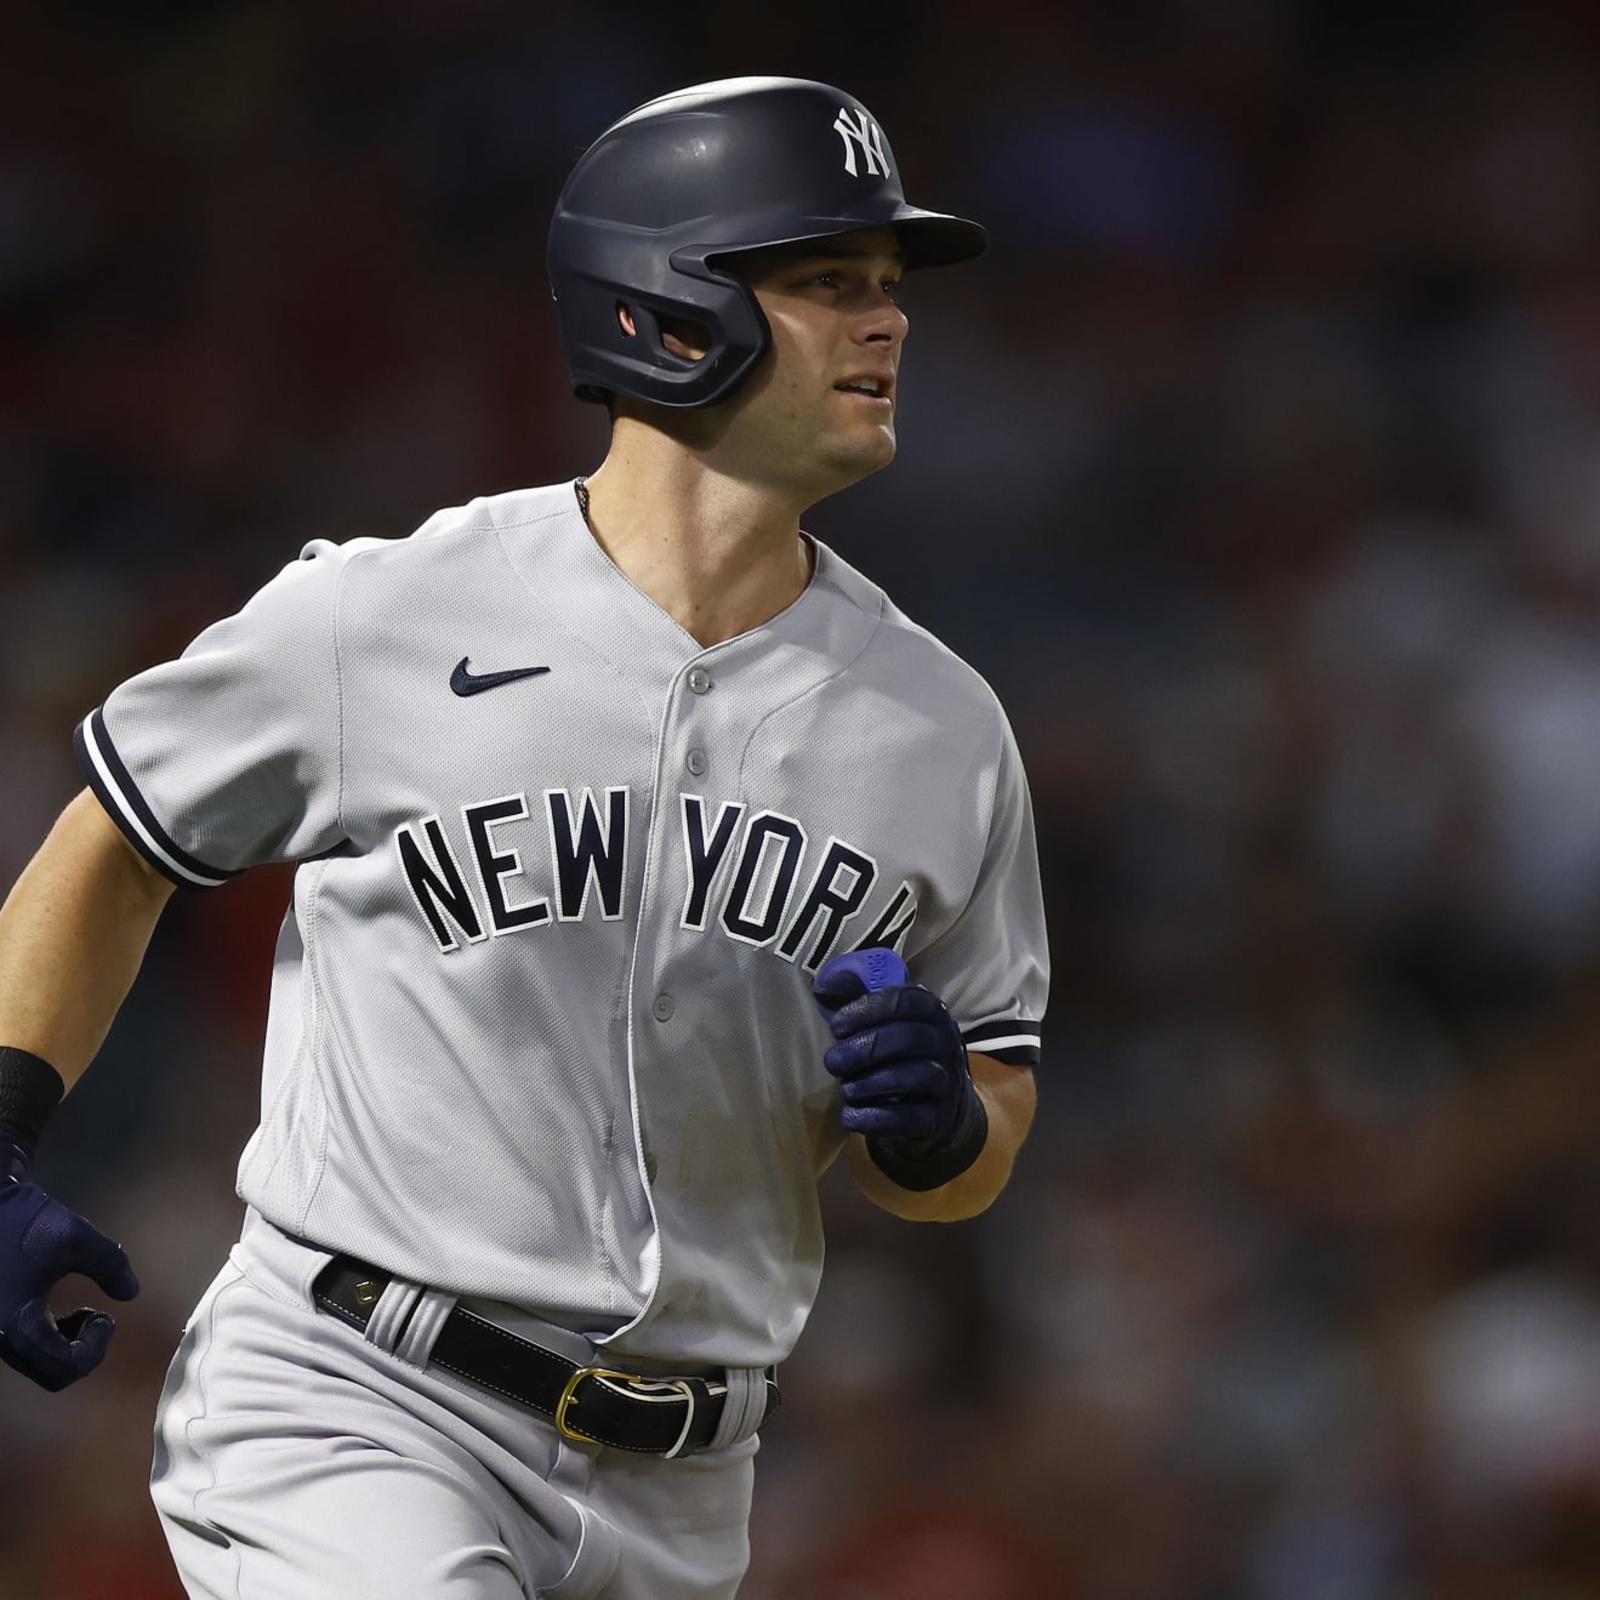 Andrew Benintendi joins New York Yankees, ready to compete for